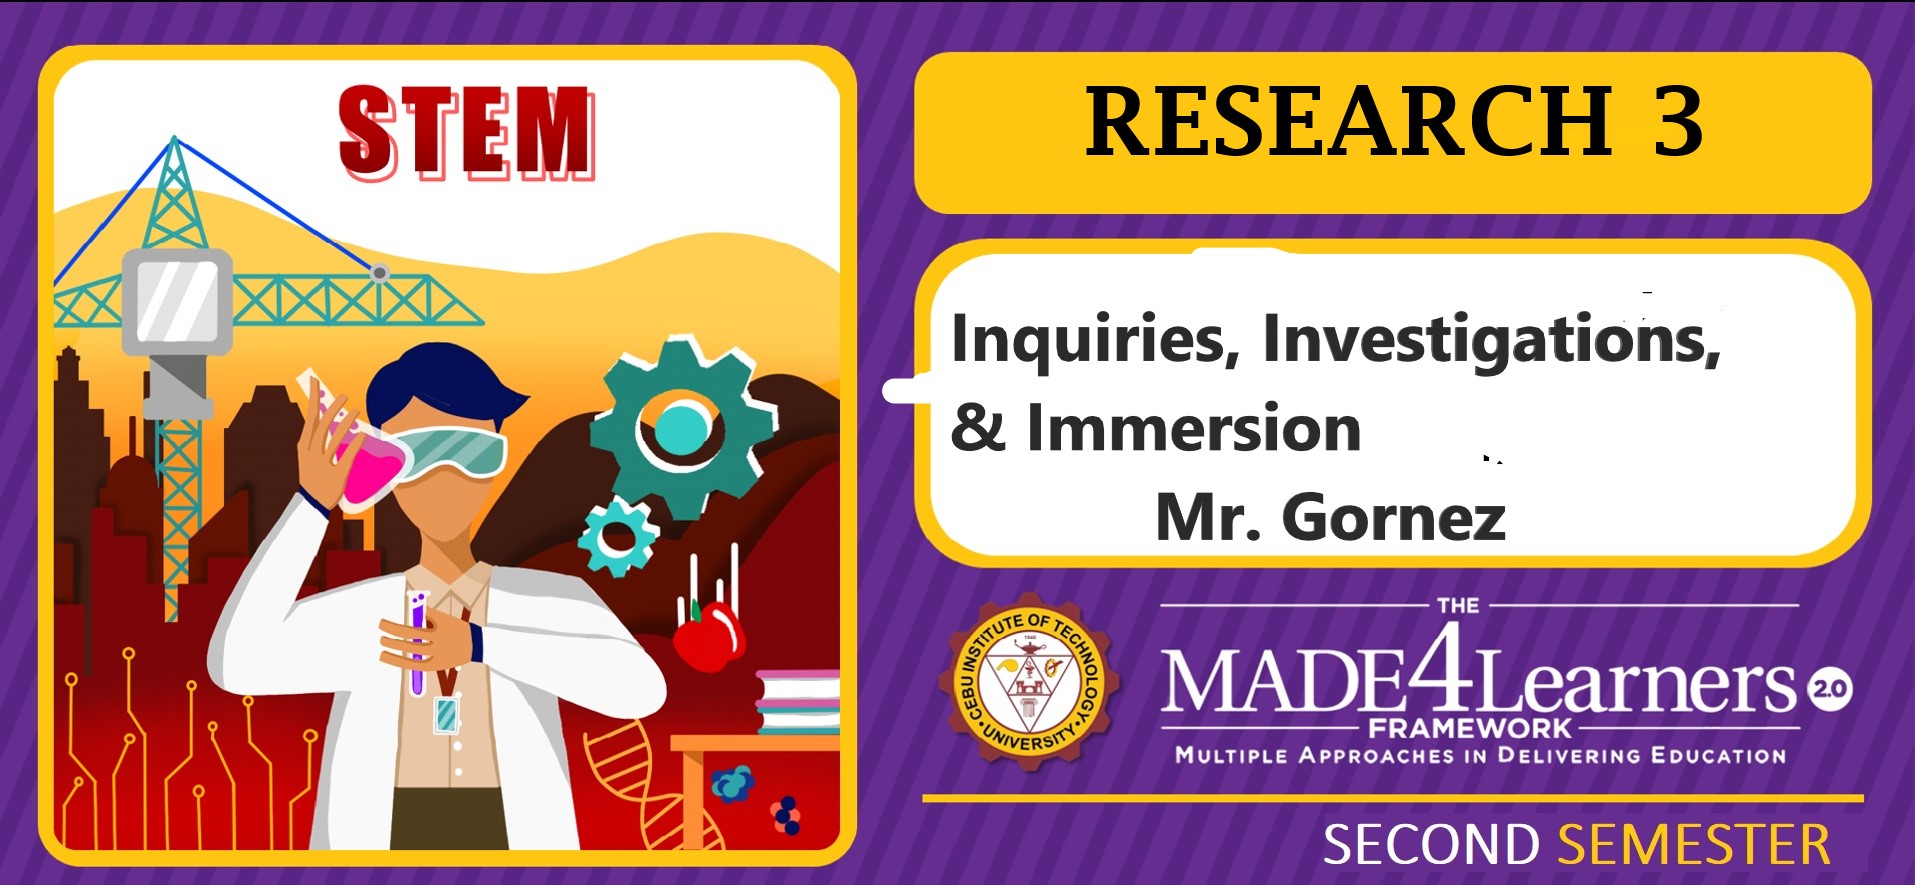 RES3: Research Inquiries, Investigation and Immersion (Gornez)